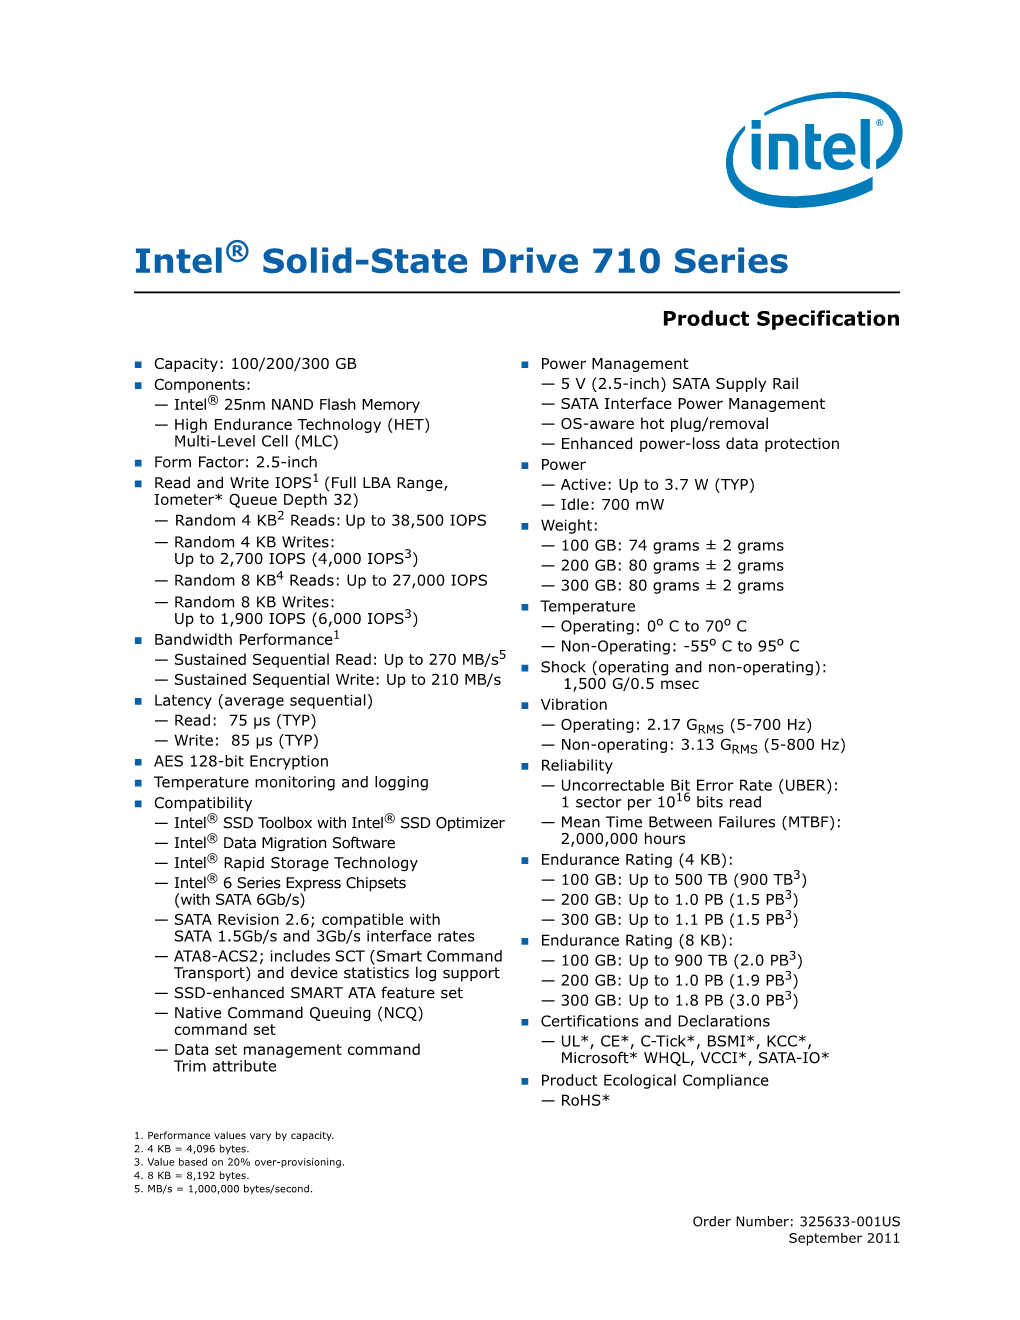 Intel Solid-State Drive 710 Series Product Specification